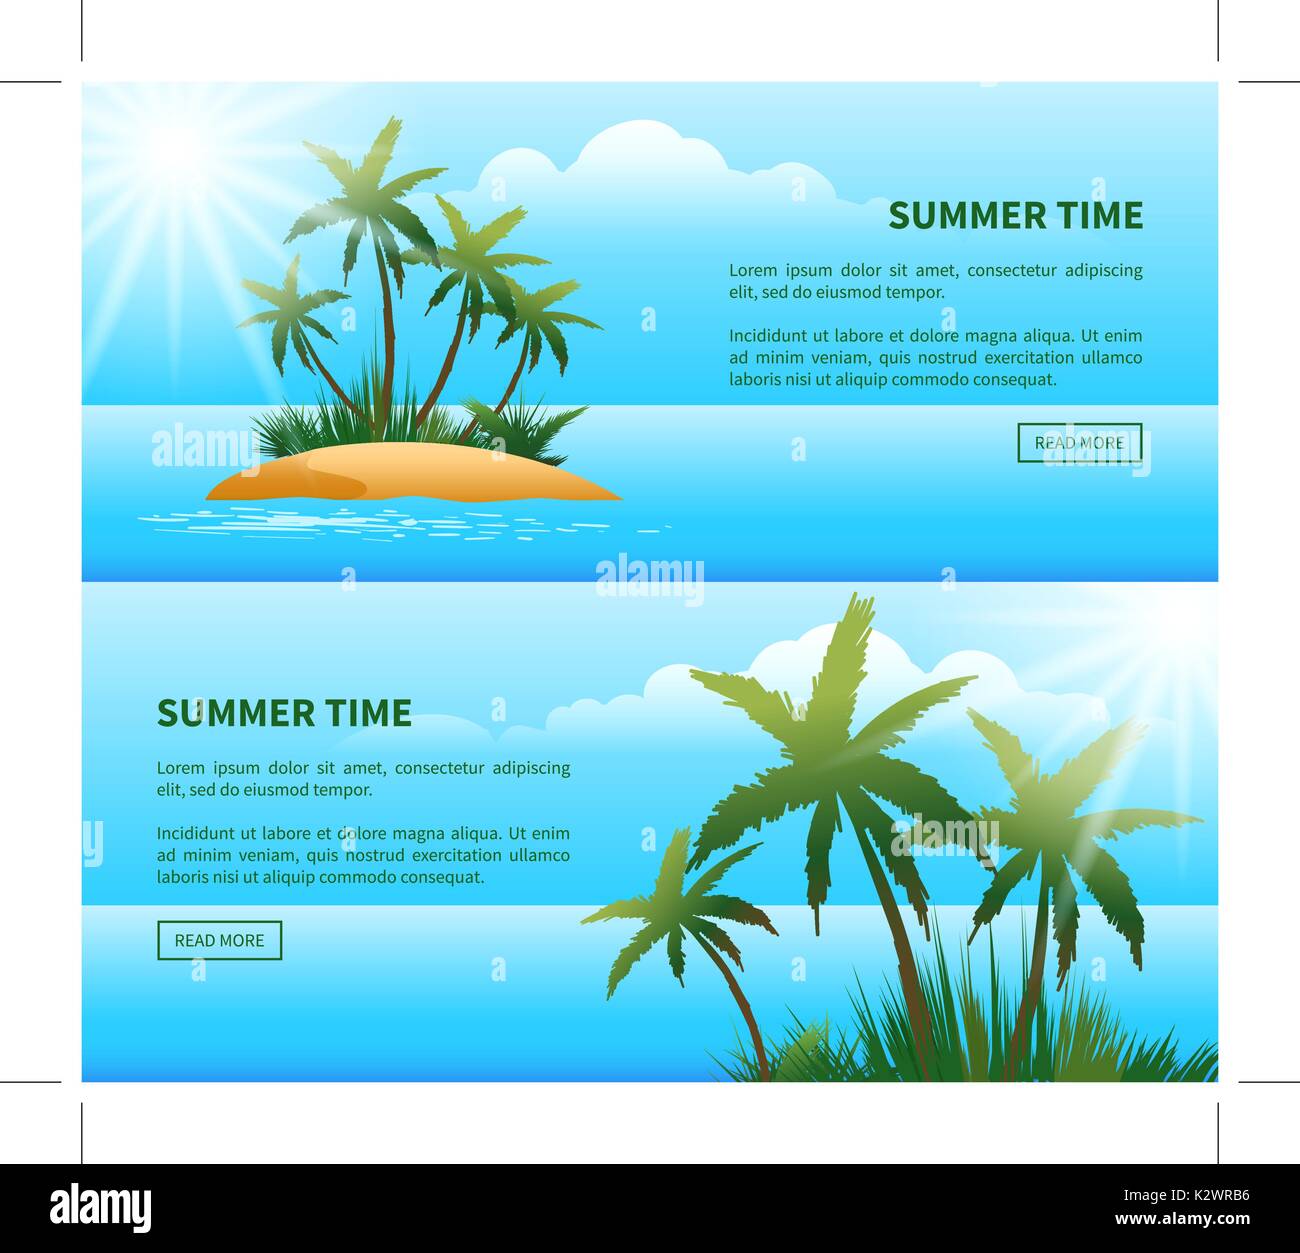 Summer time web banners. Tropical island, palm trees, ocean. Vector illustration Stock Vector